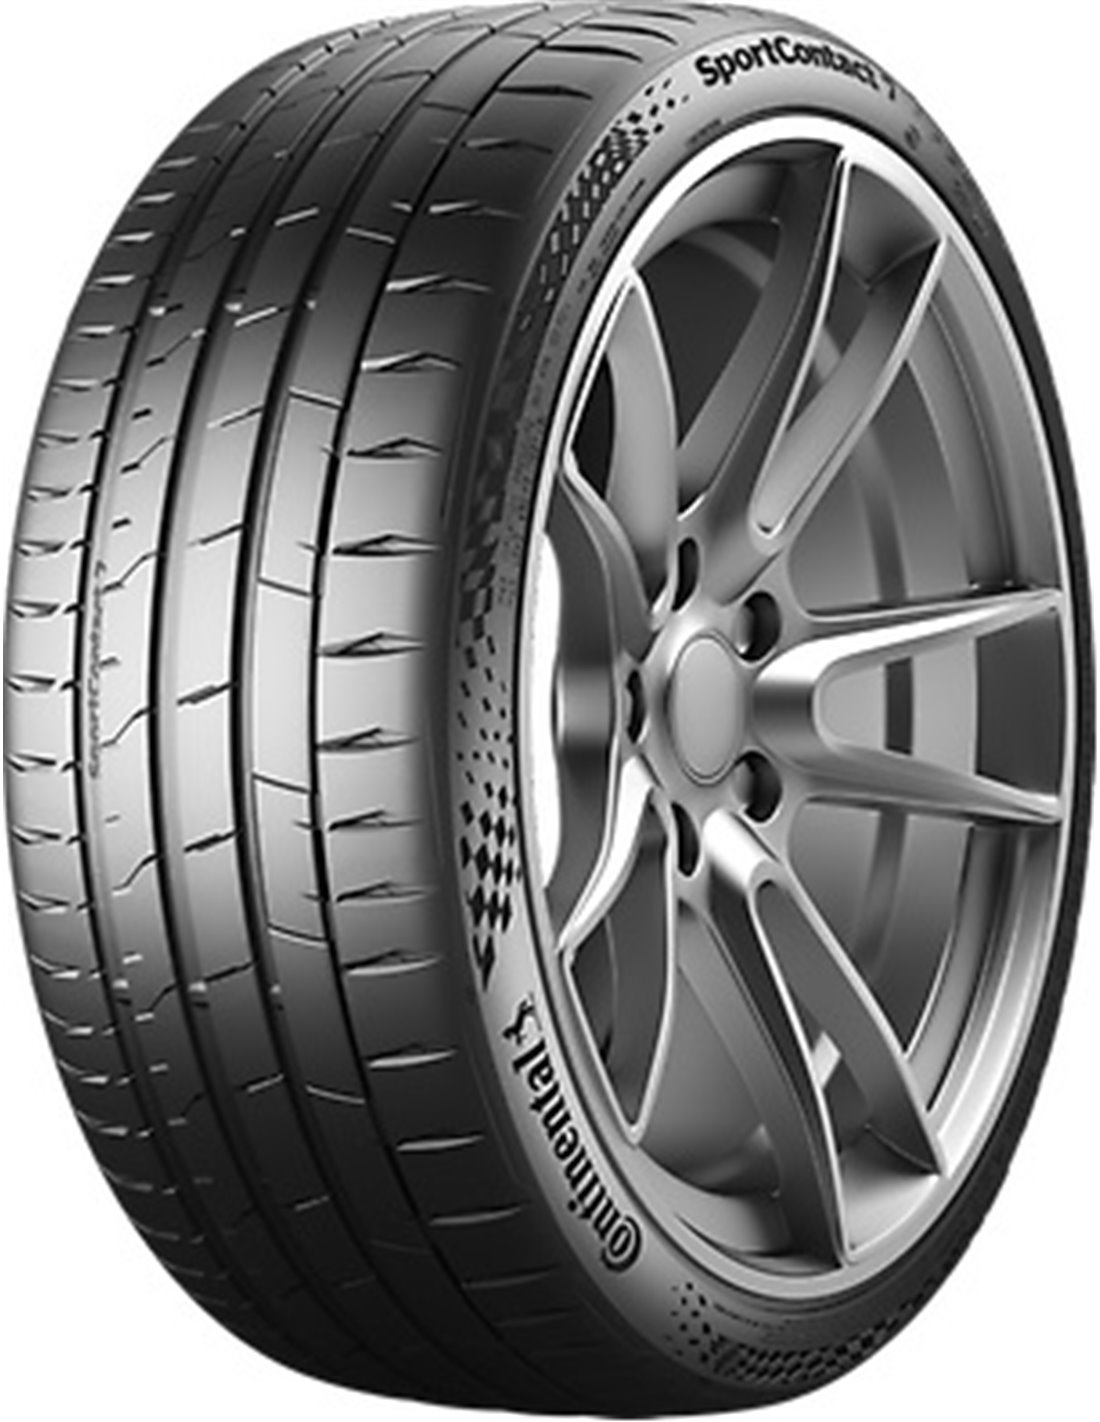 Anvelope Vara Continental Sport Contact 7 Nd0 325/30R21 108Y